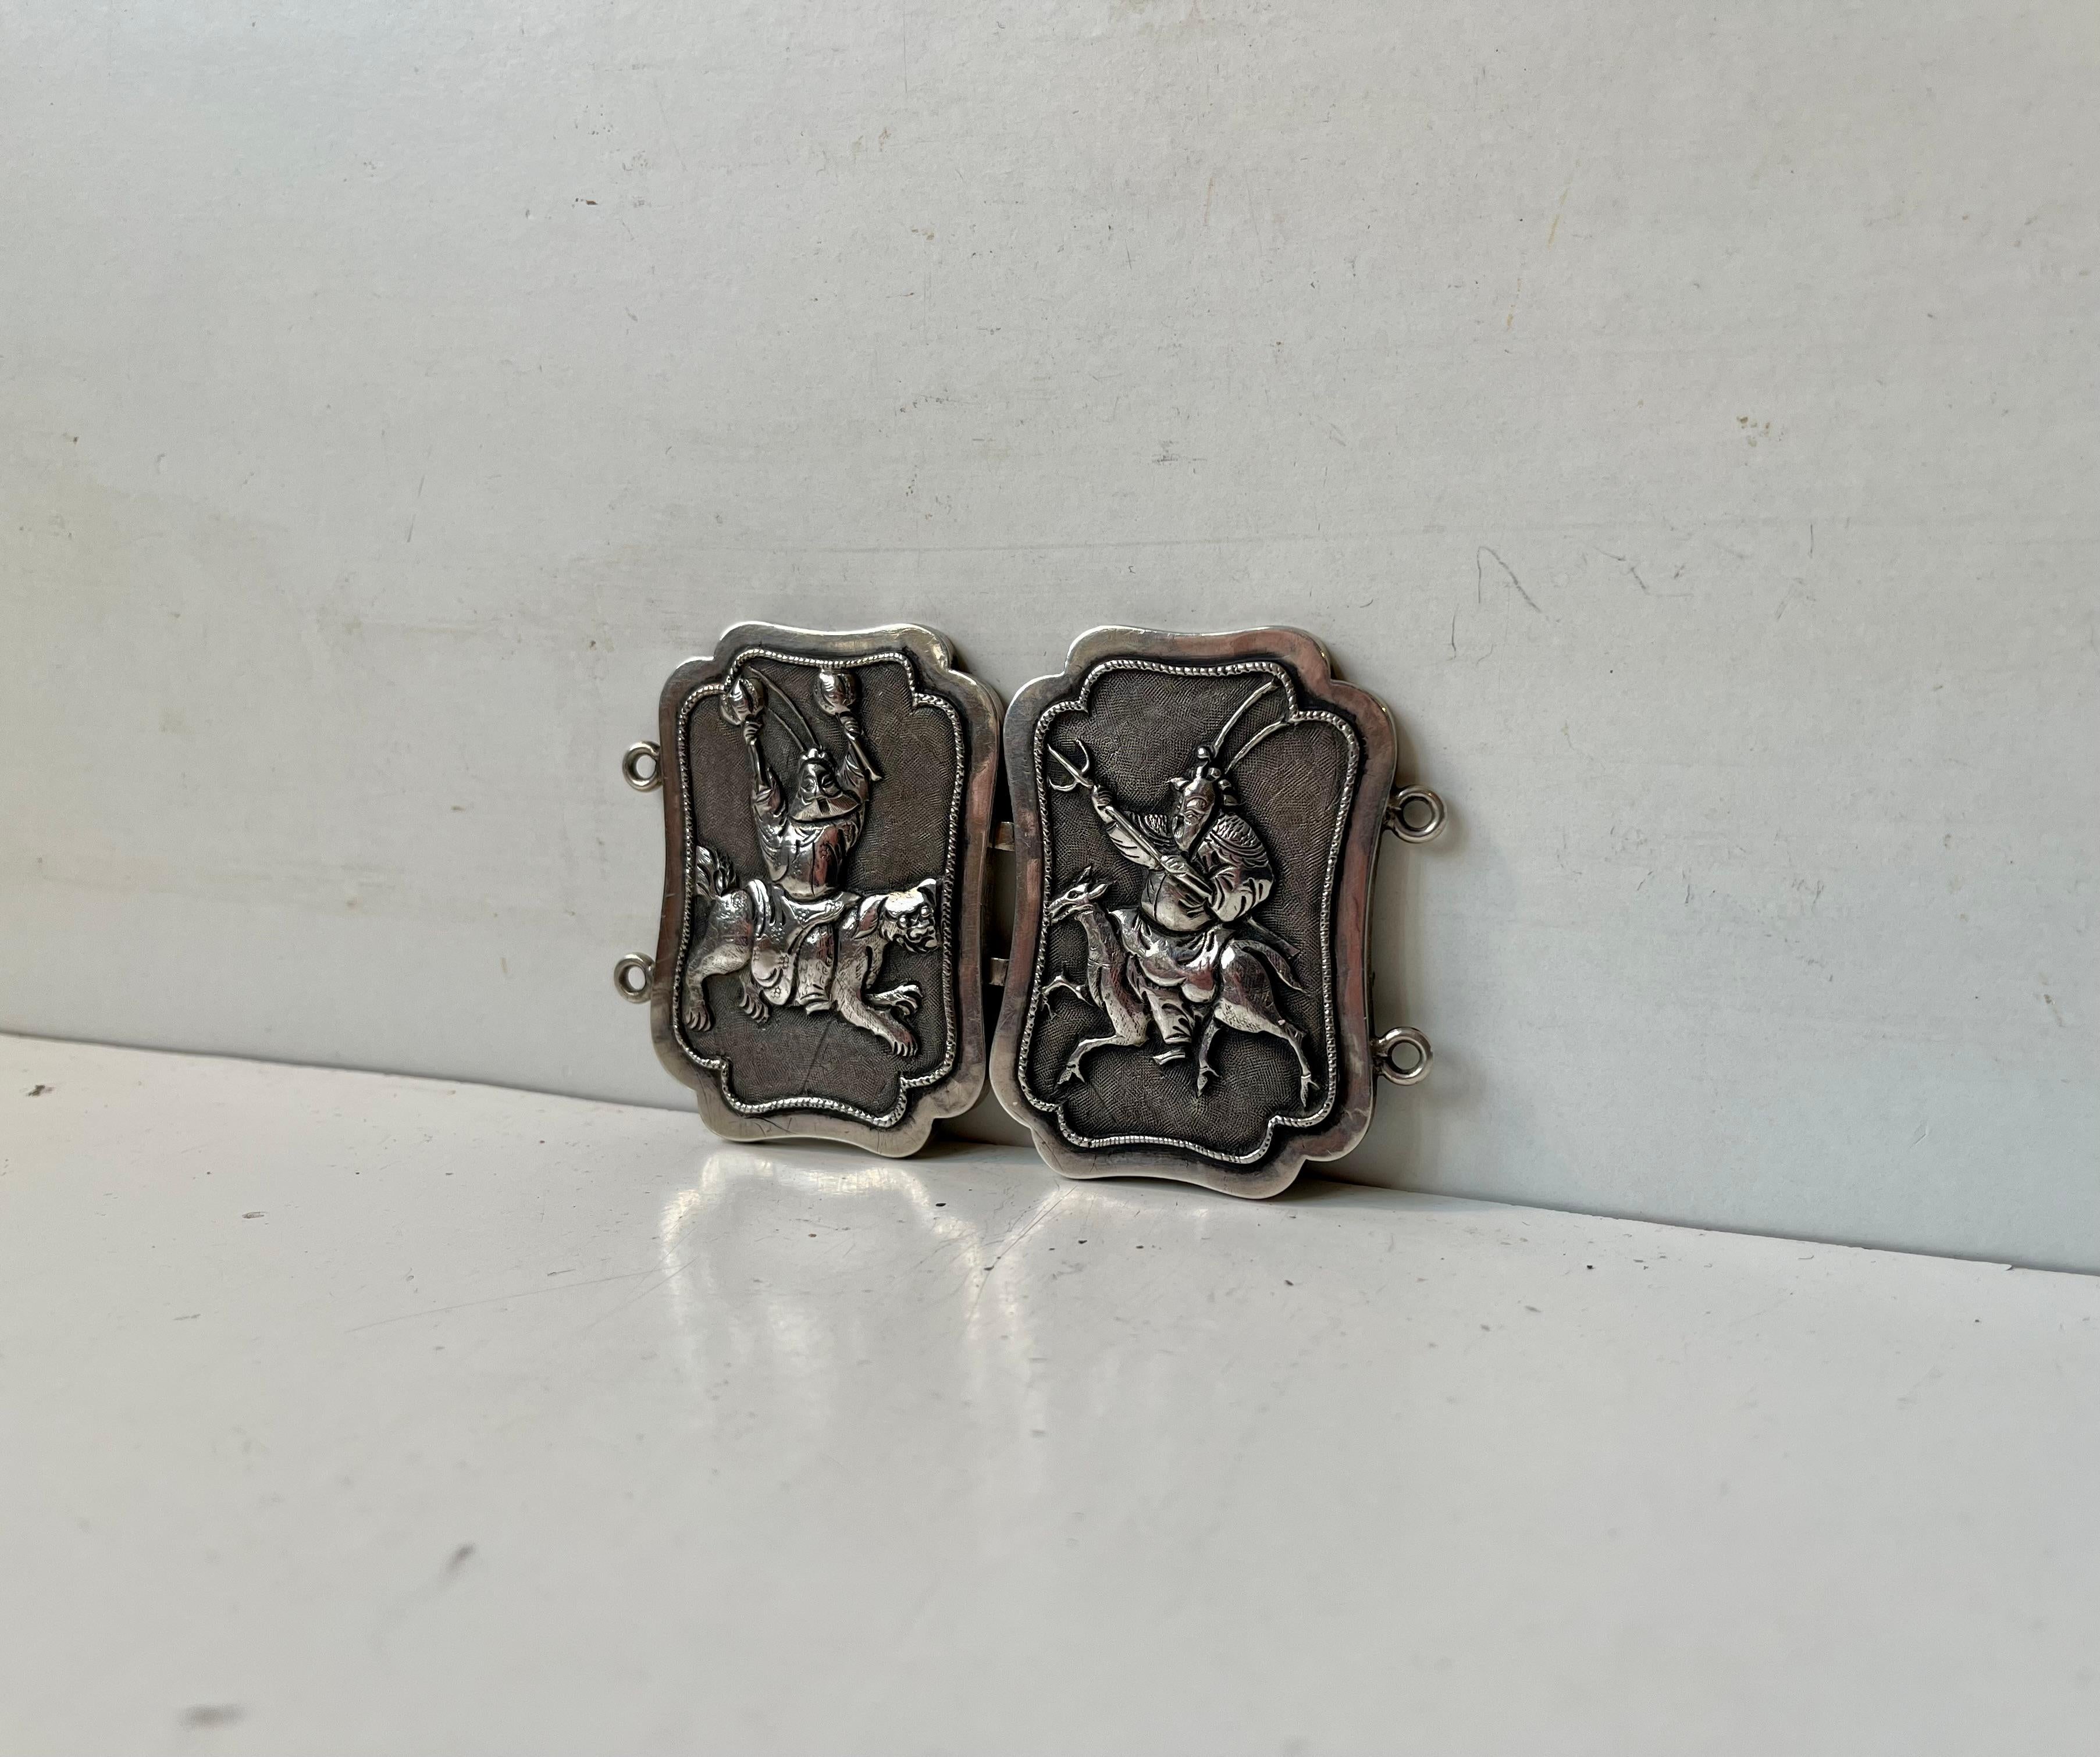 Two-piece belt buckle in sterling silver. Made in Woshing Shanghai circa 1910. It depicts samurais riding on Foo Dogs/Lions on a matte textured background. Very fine details and clear hallmarks to its backside. WS for Woshing - Shanghai and Chinese